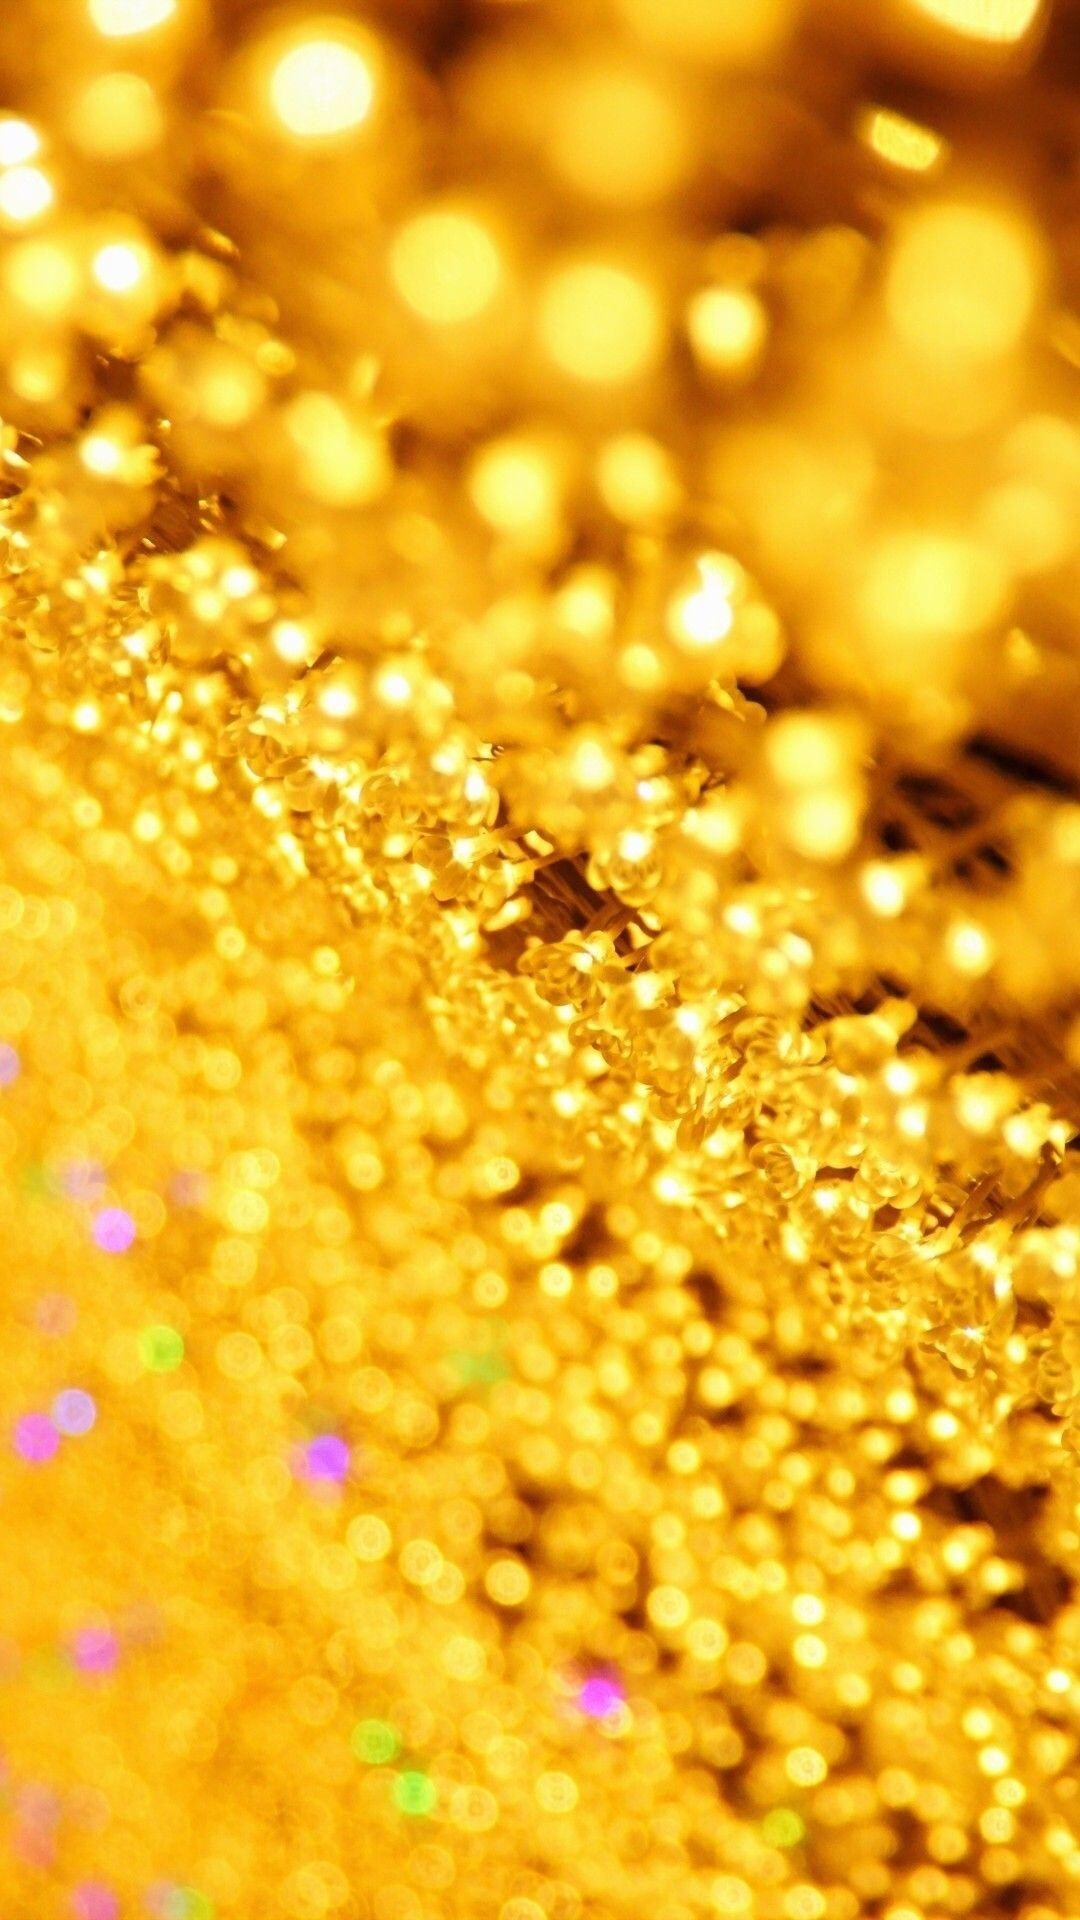 Gold Sparkle: Glitter gold, Shining material consisting of an assortment of small, reflective particles. 1080x1920 Full HD Background.